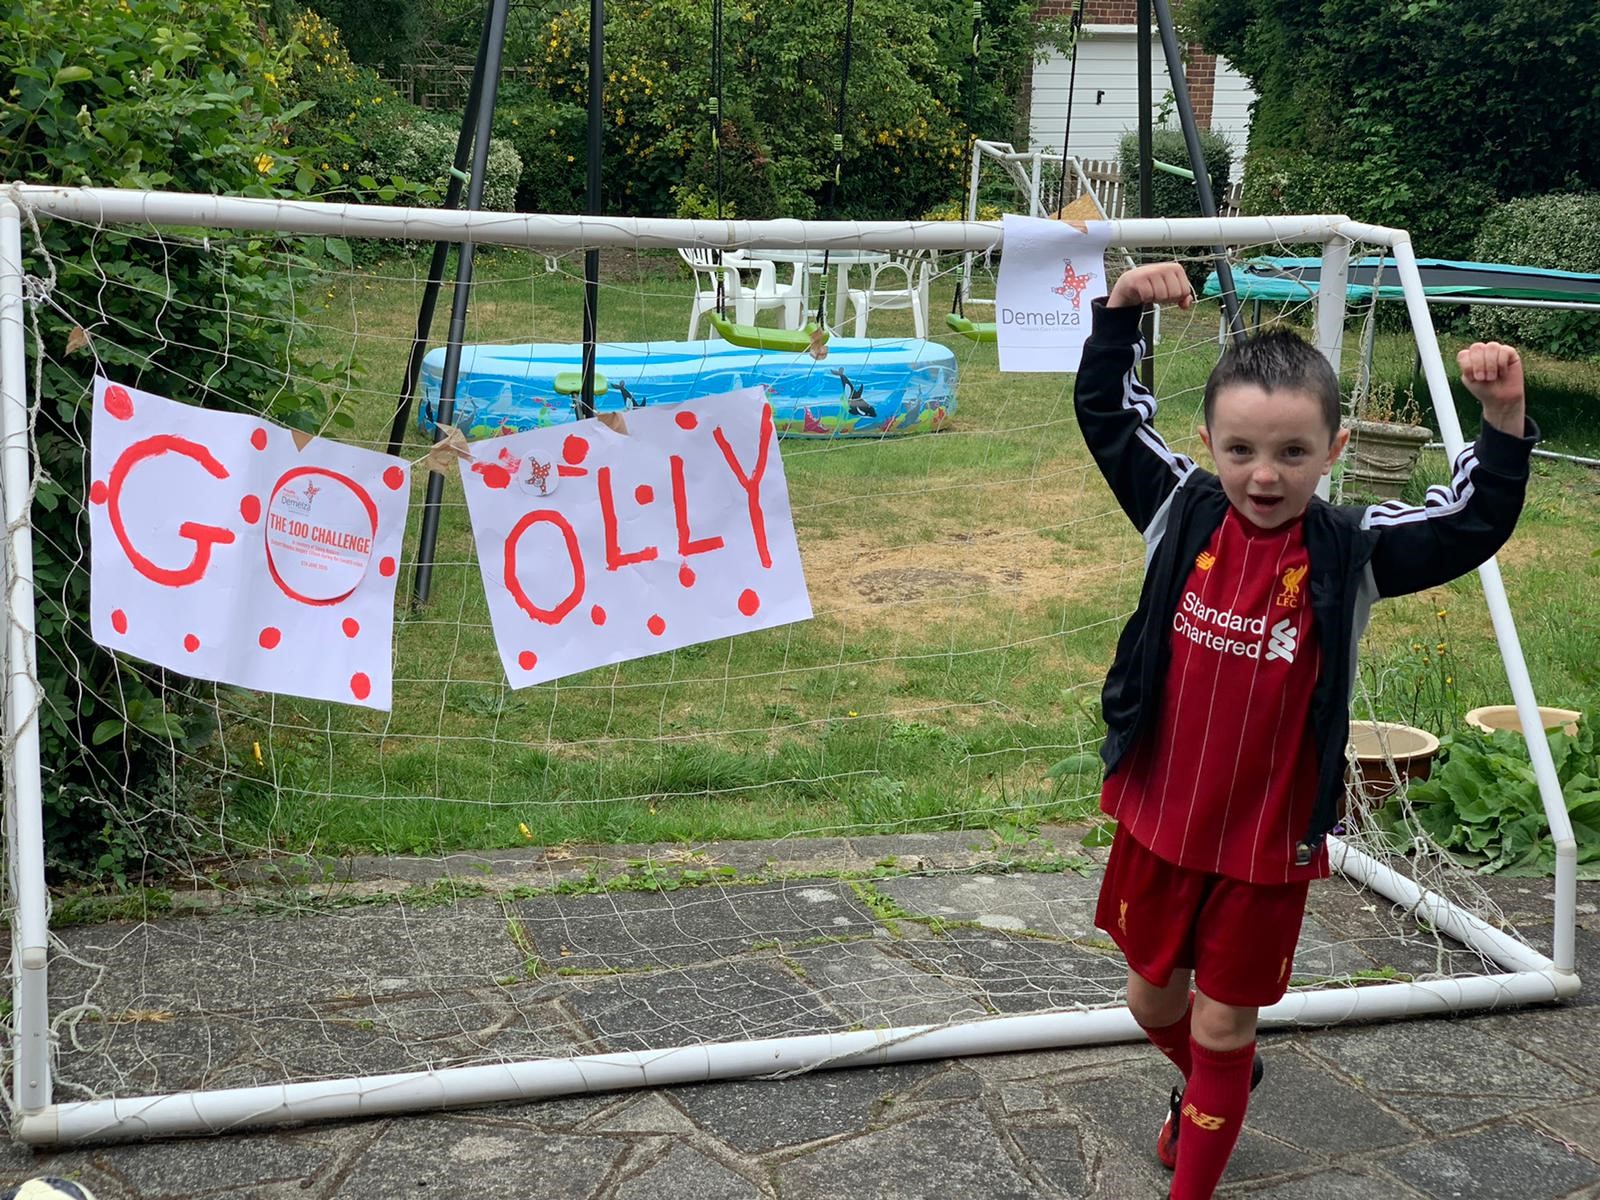 A boy celebrates completing his fundraising challenge. He is standing in front of a football goal with a 'GO OLLY' sign.